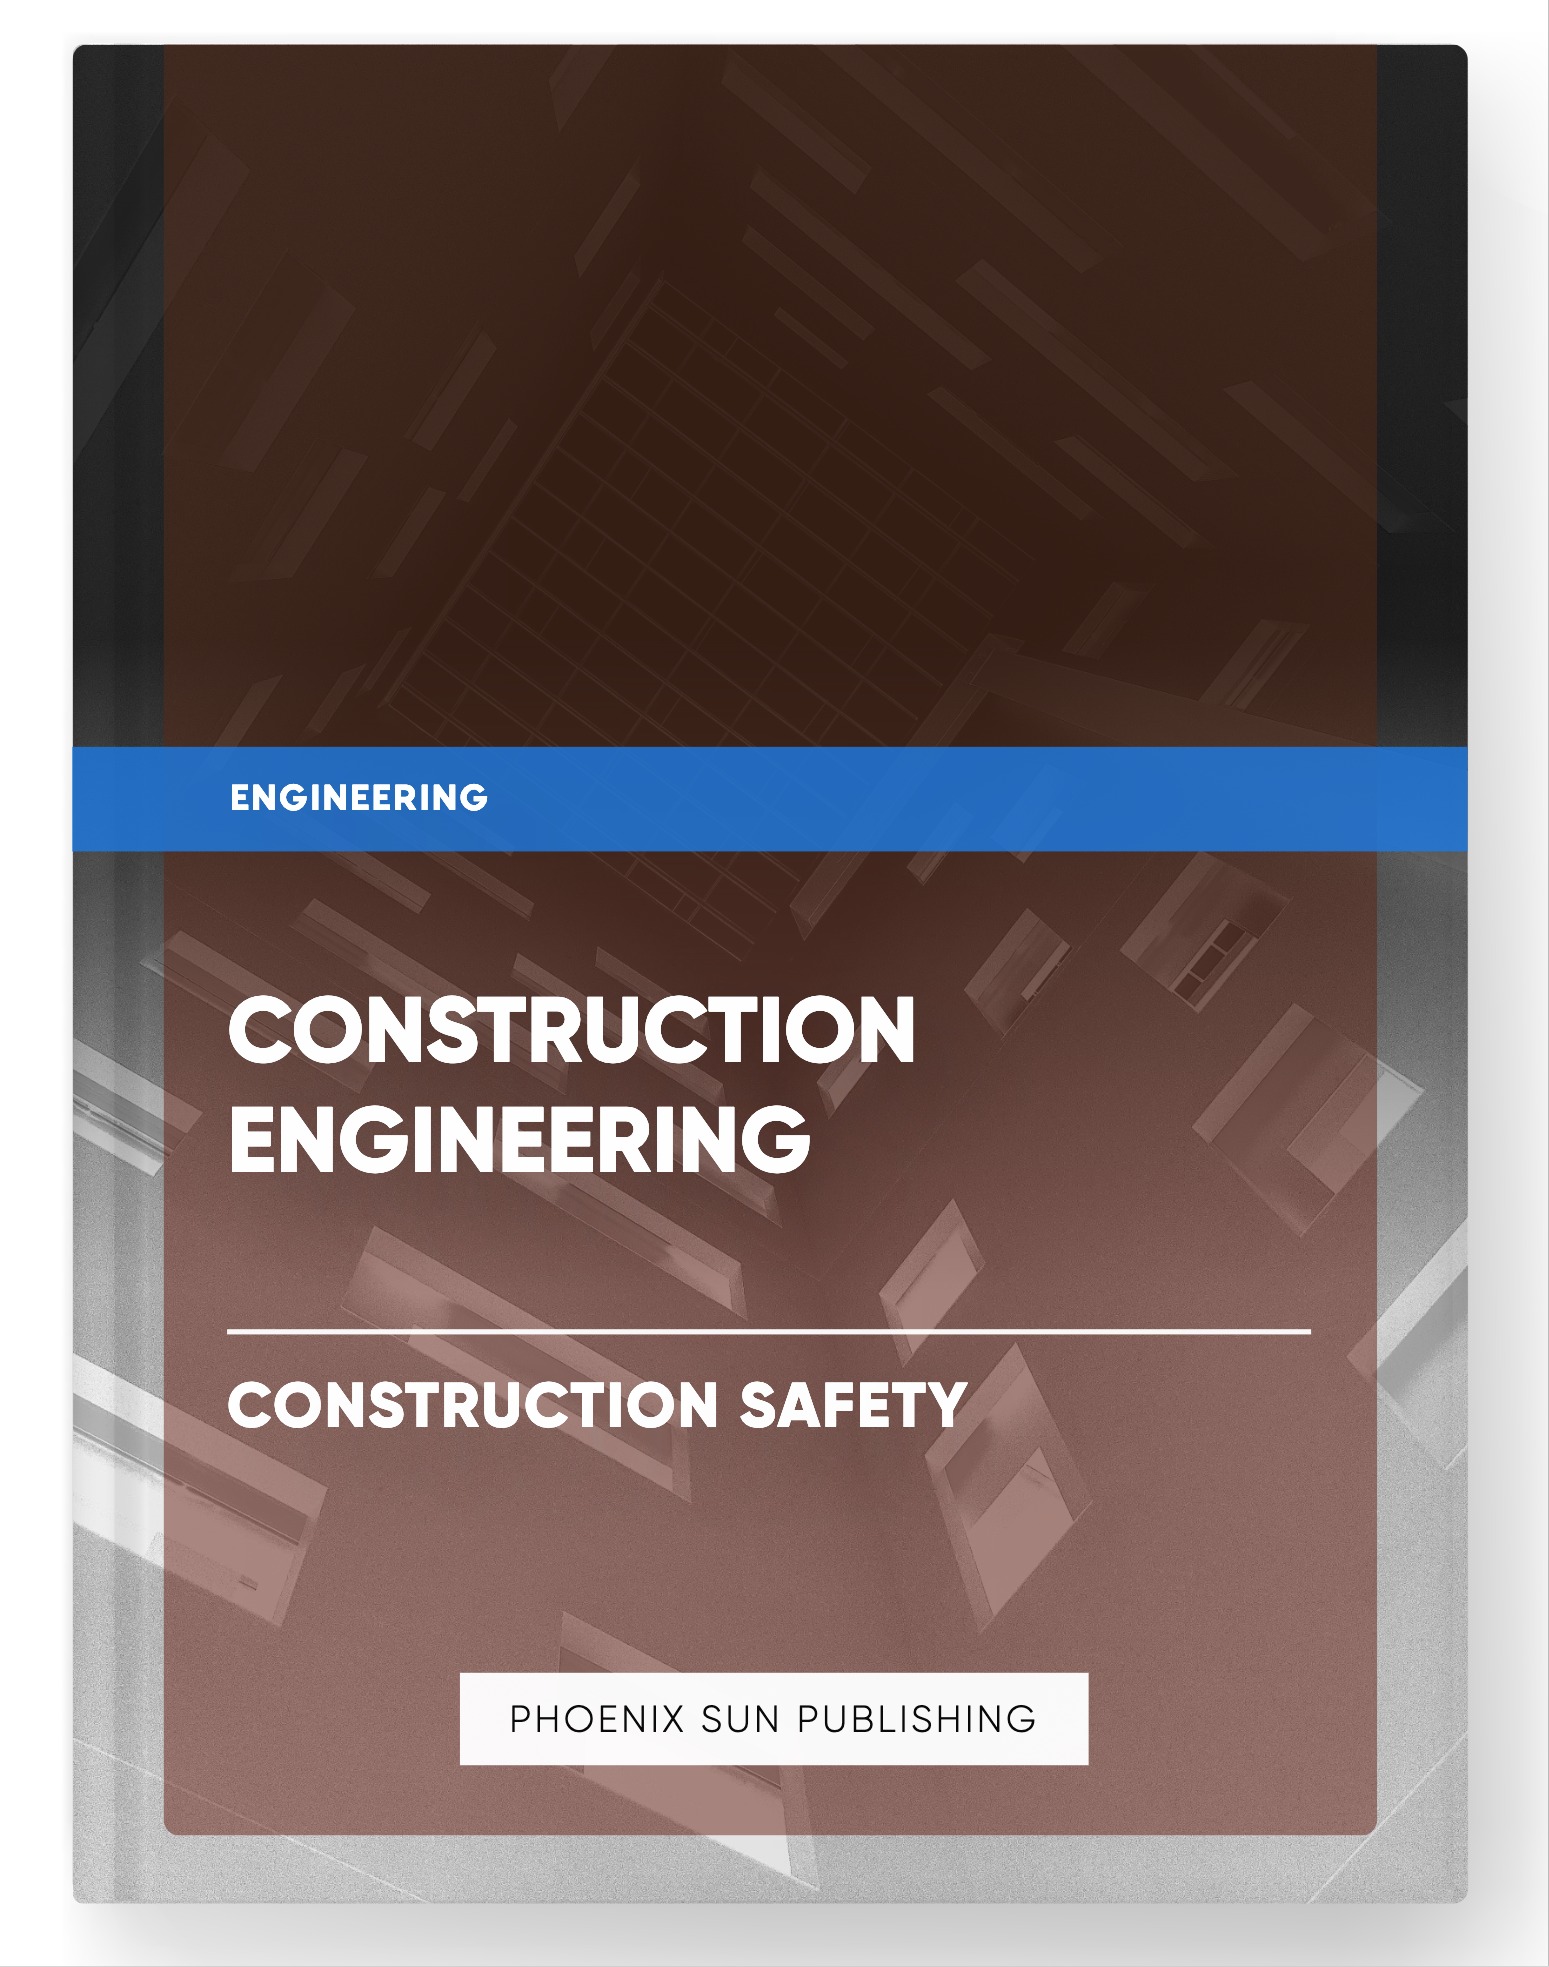 Construction Engineering – Construction Safety